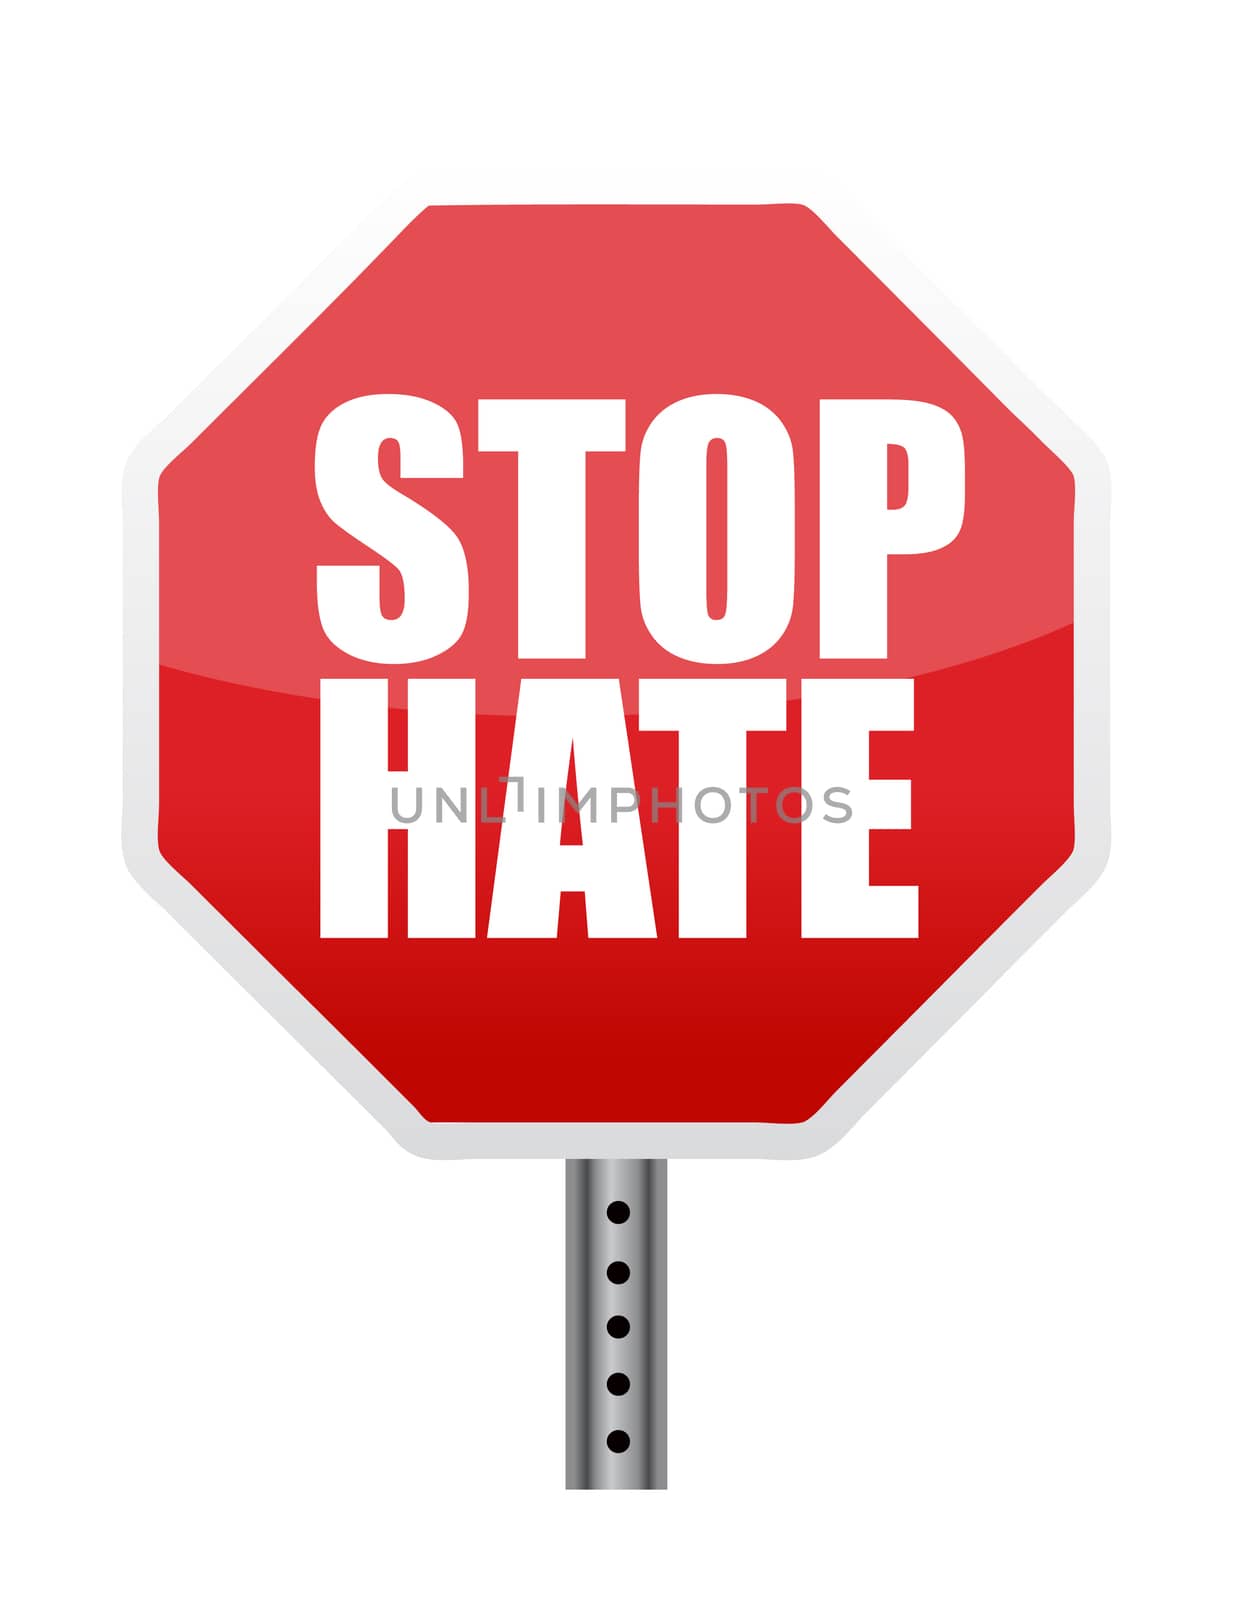 stop sign reading "Stop Hate" by alexmillos